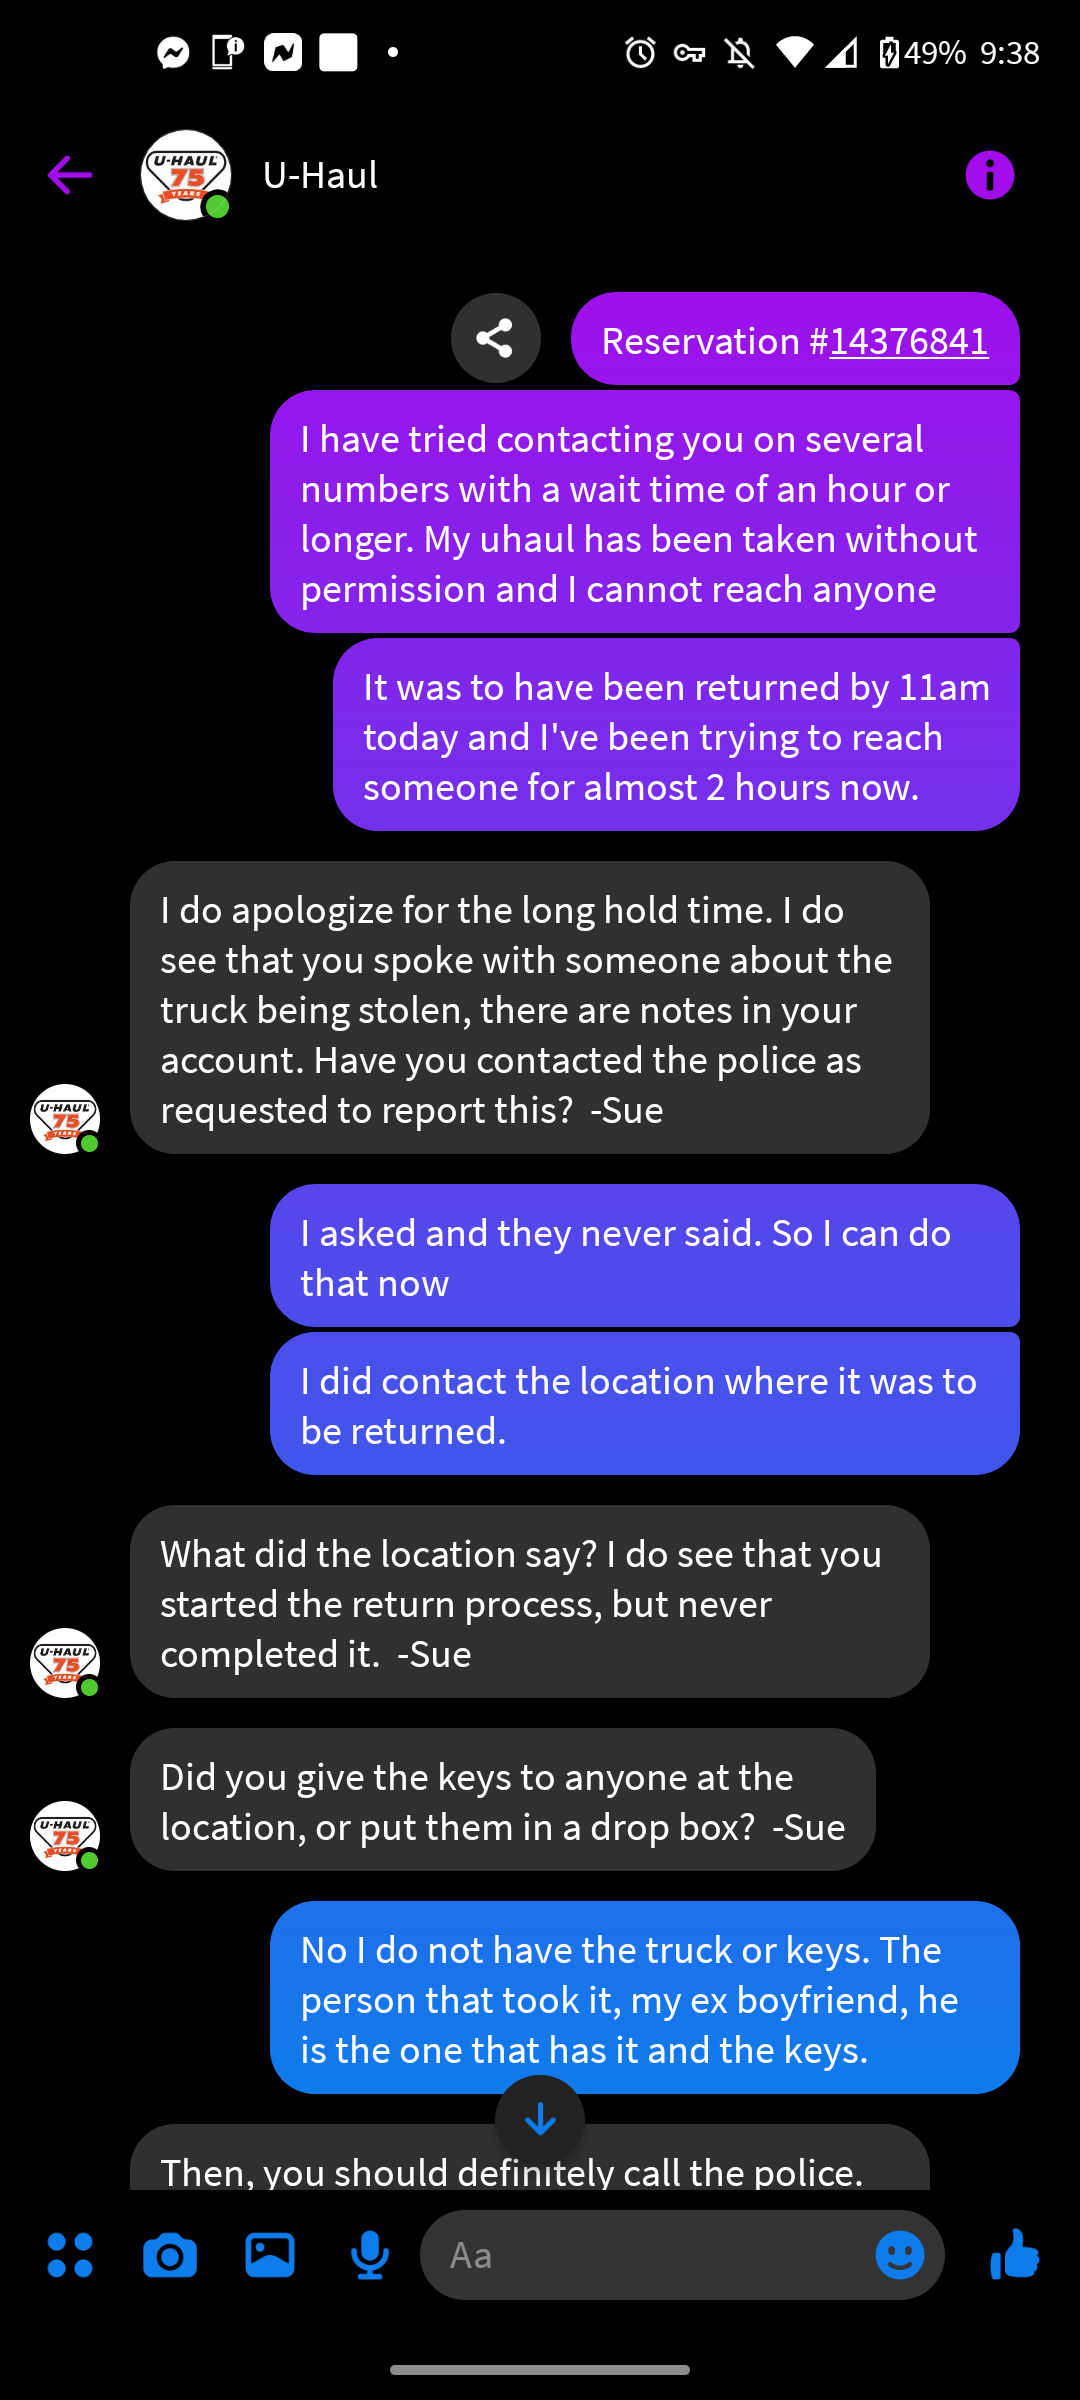 Initial contact with Uhaul